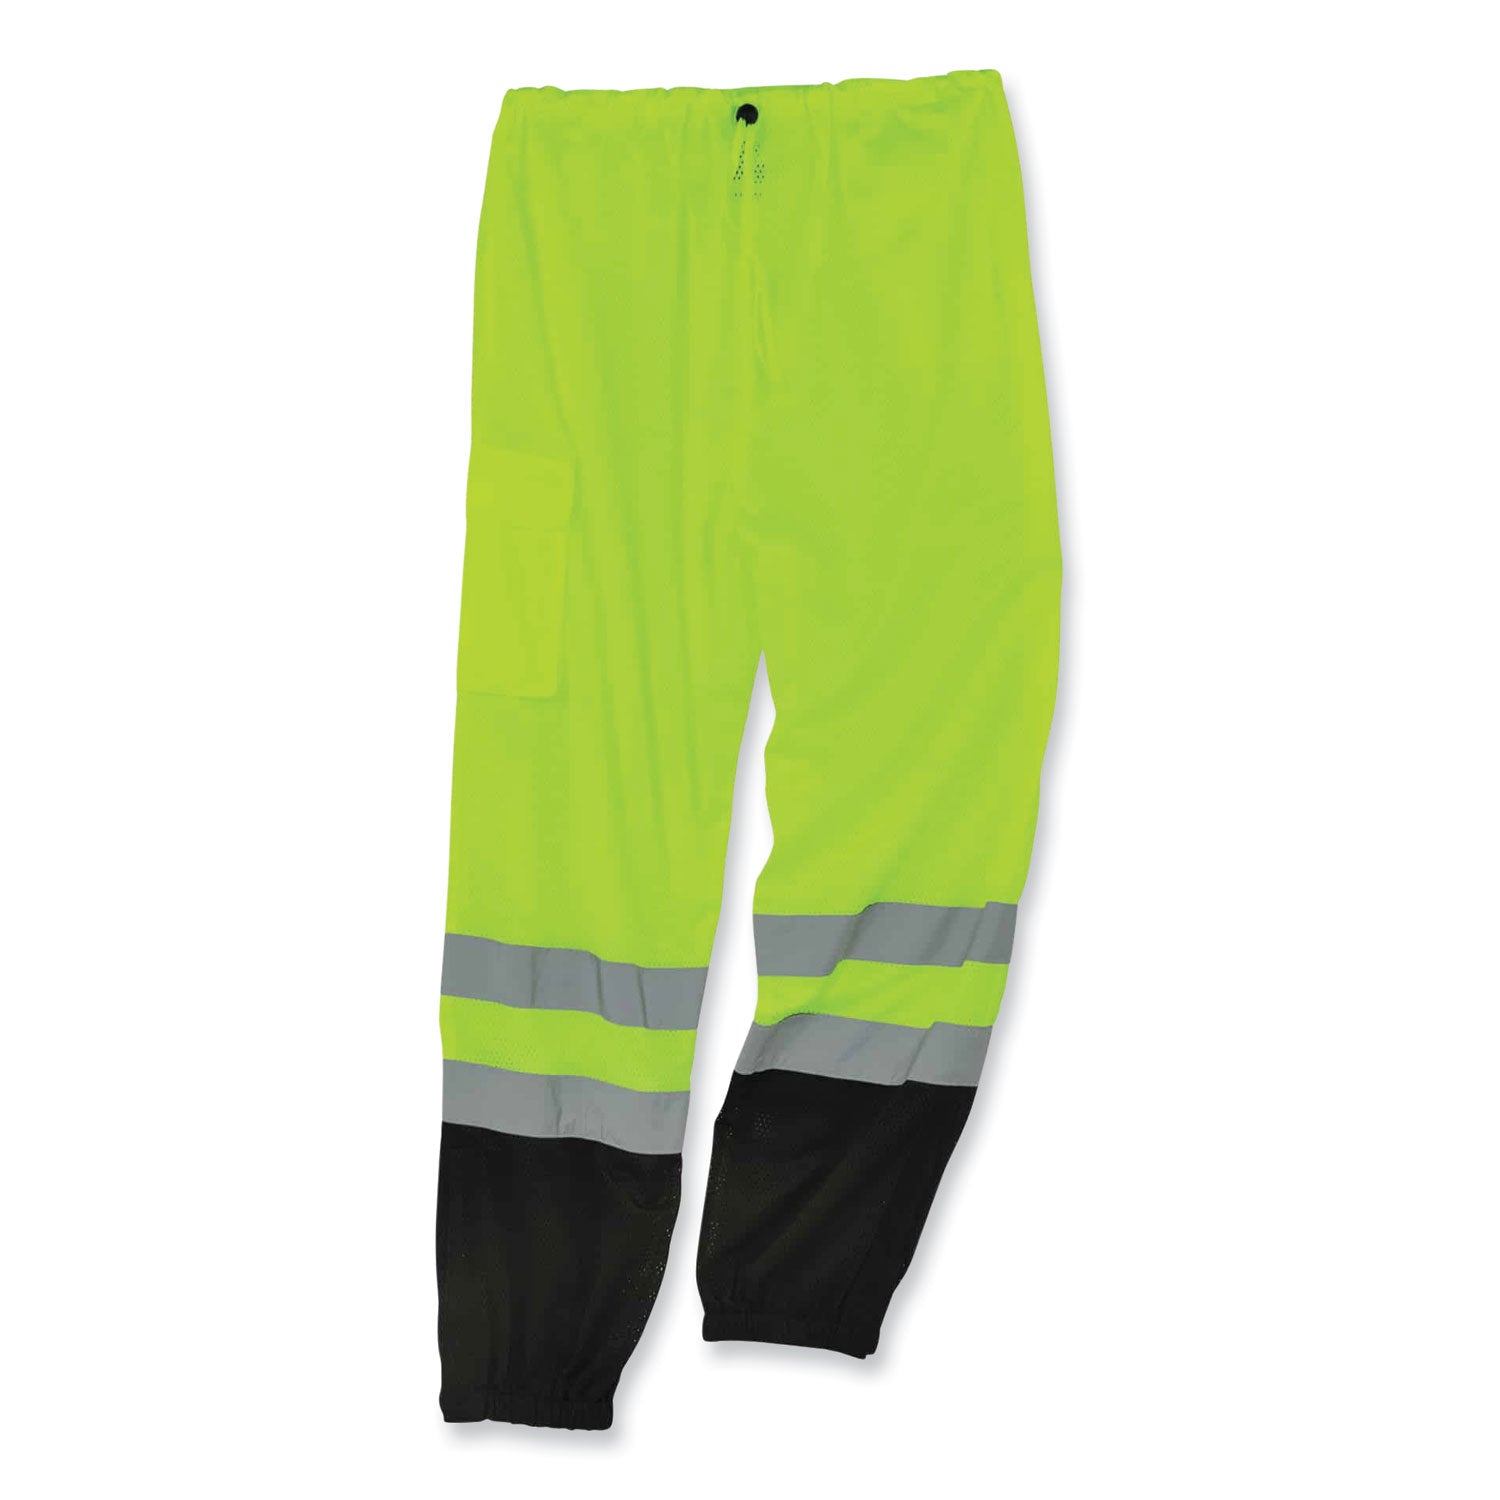 glowear-8910bk-class-e-hi-vis-pants-with-black-bottom-polyester-4x-large-5x-large-lime-ships-in-1-3-business-days_ego23959 - 1